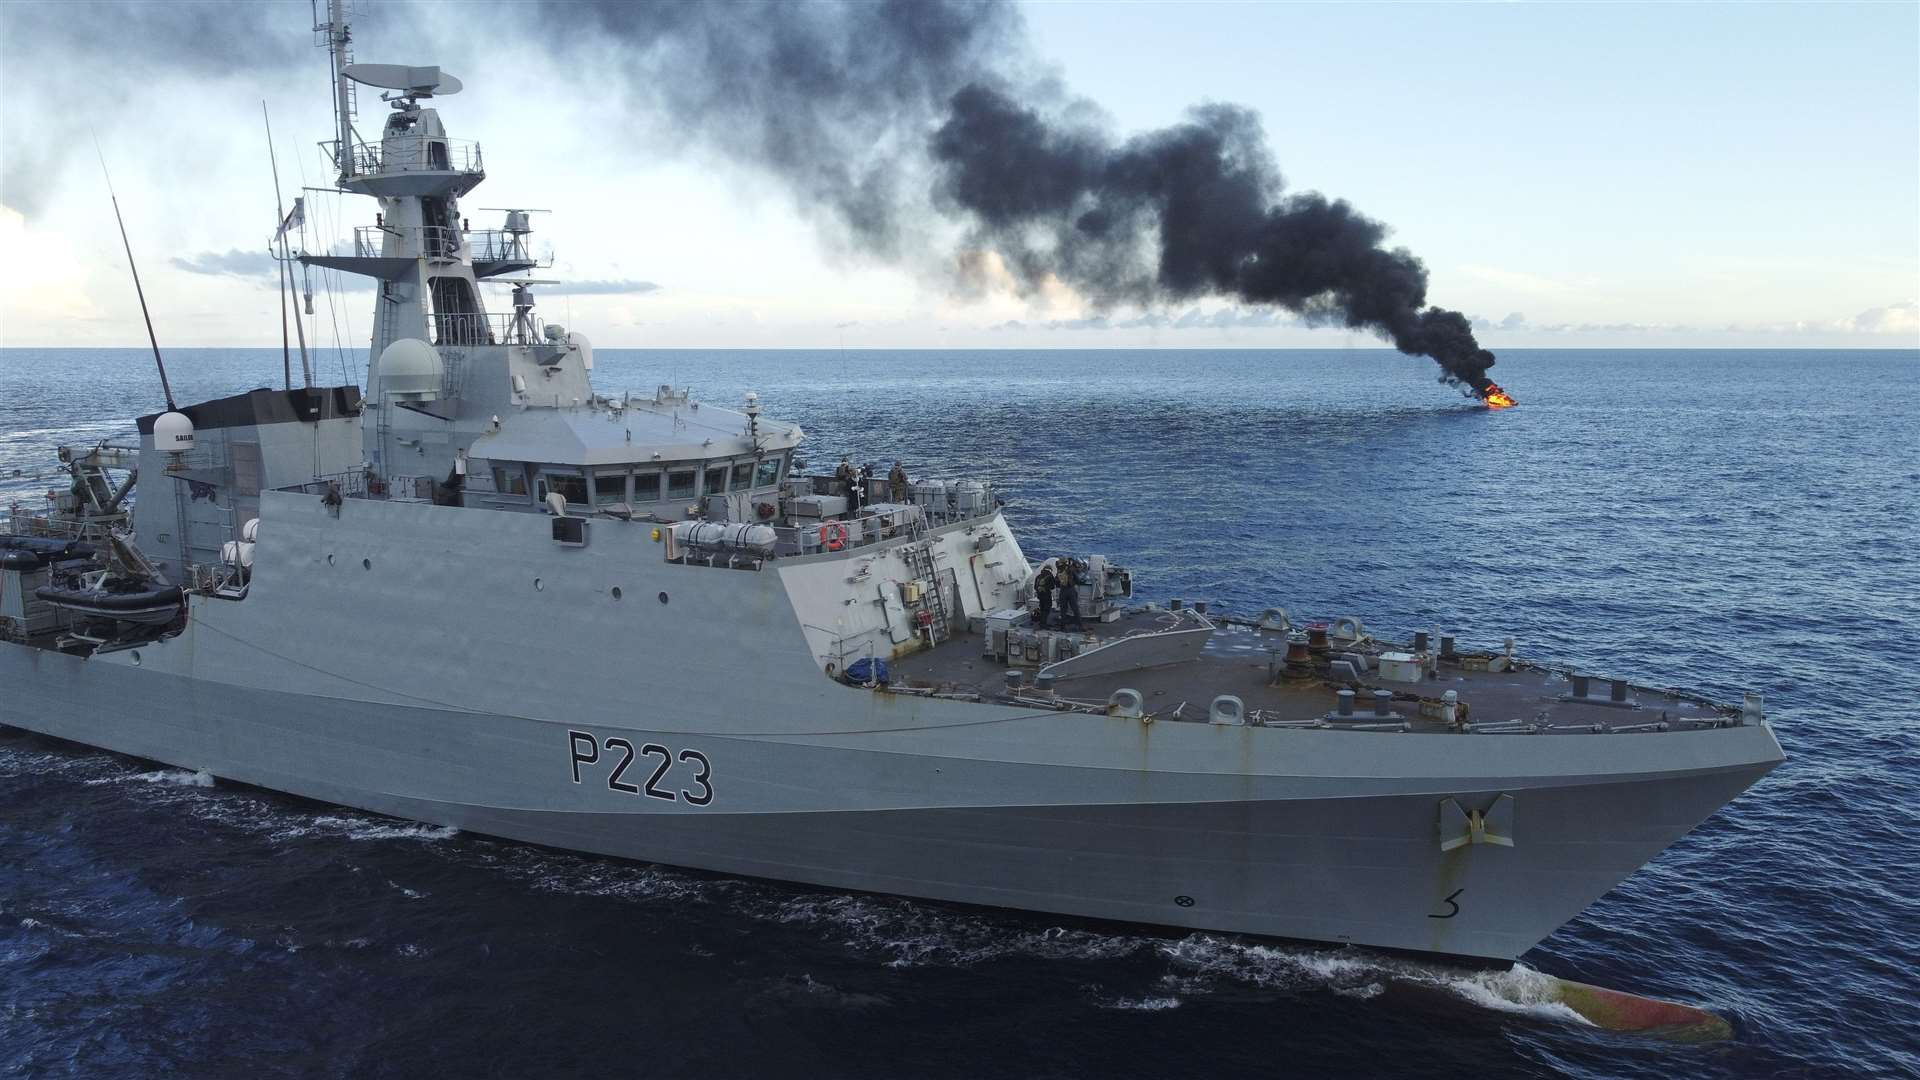 The HMS Medway was involved in a £24million cocaine bust. Picture: Royal Navy